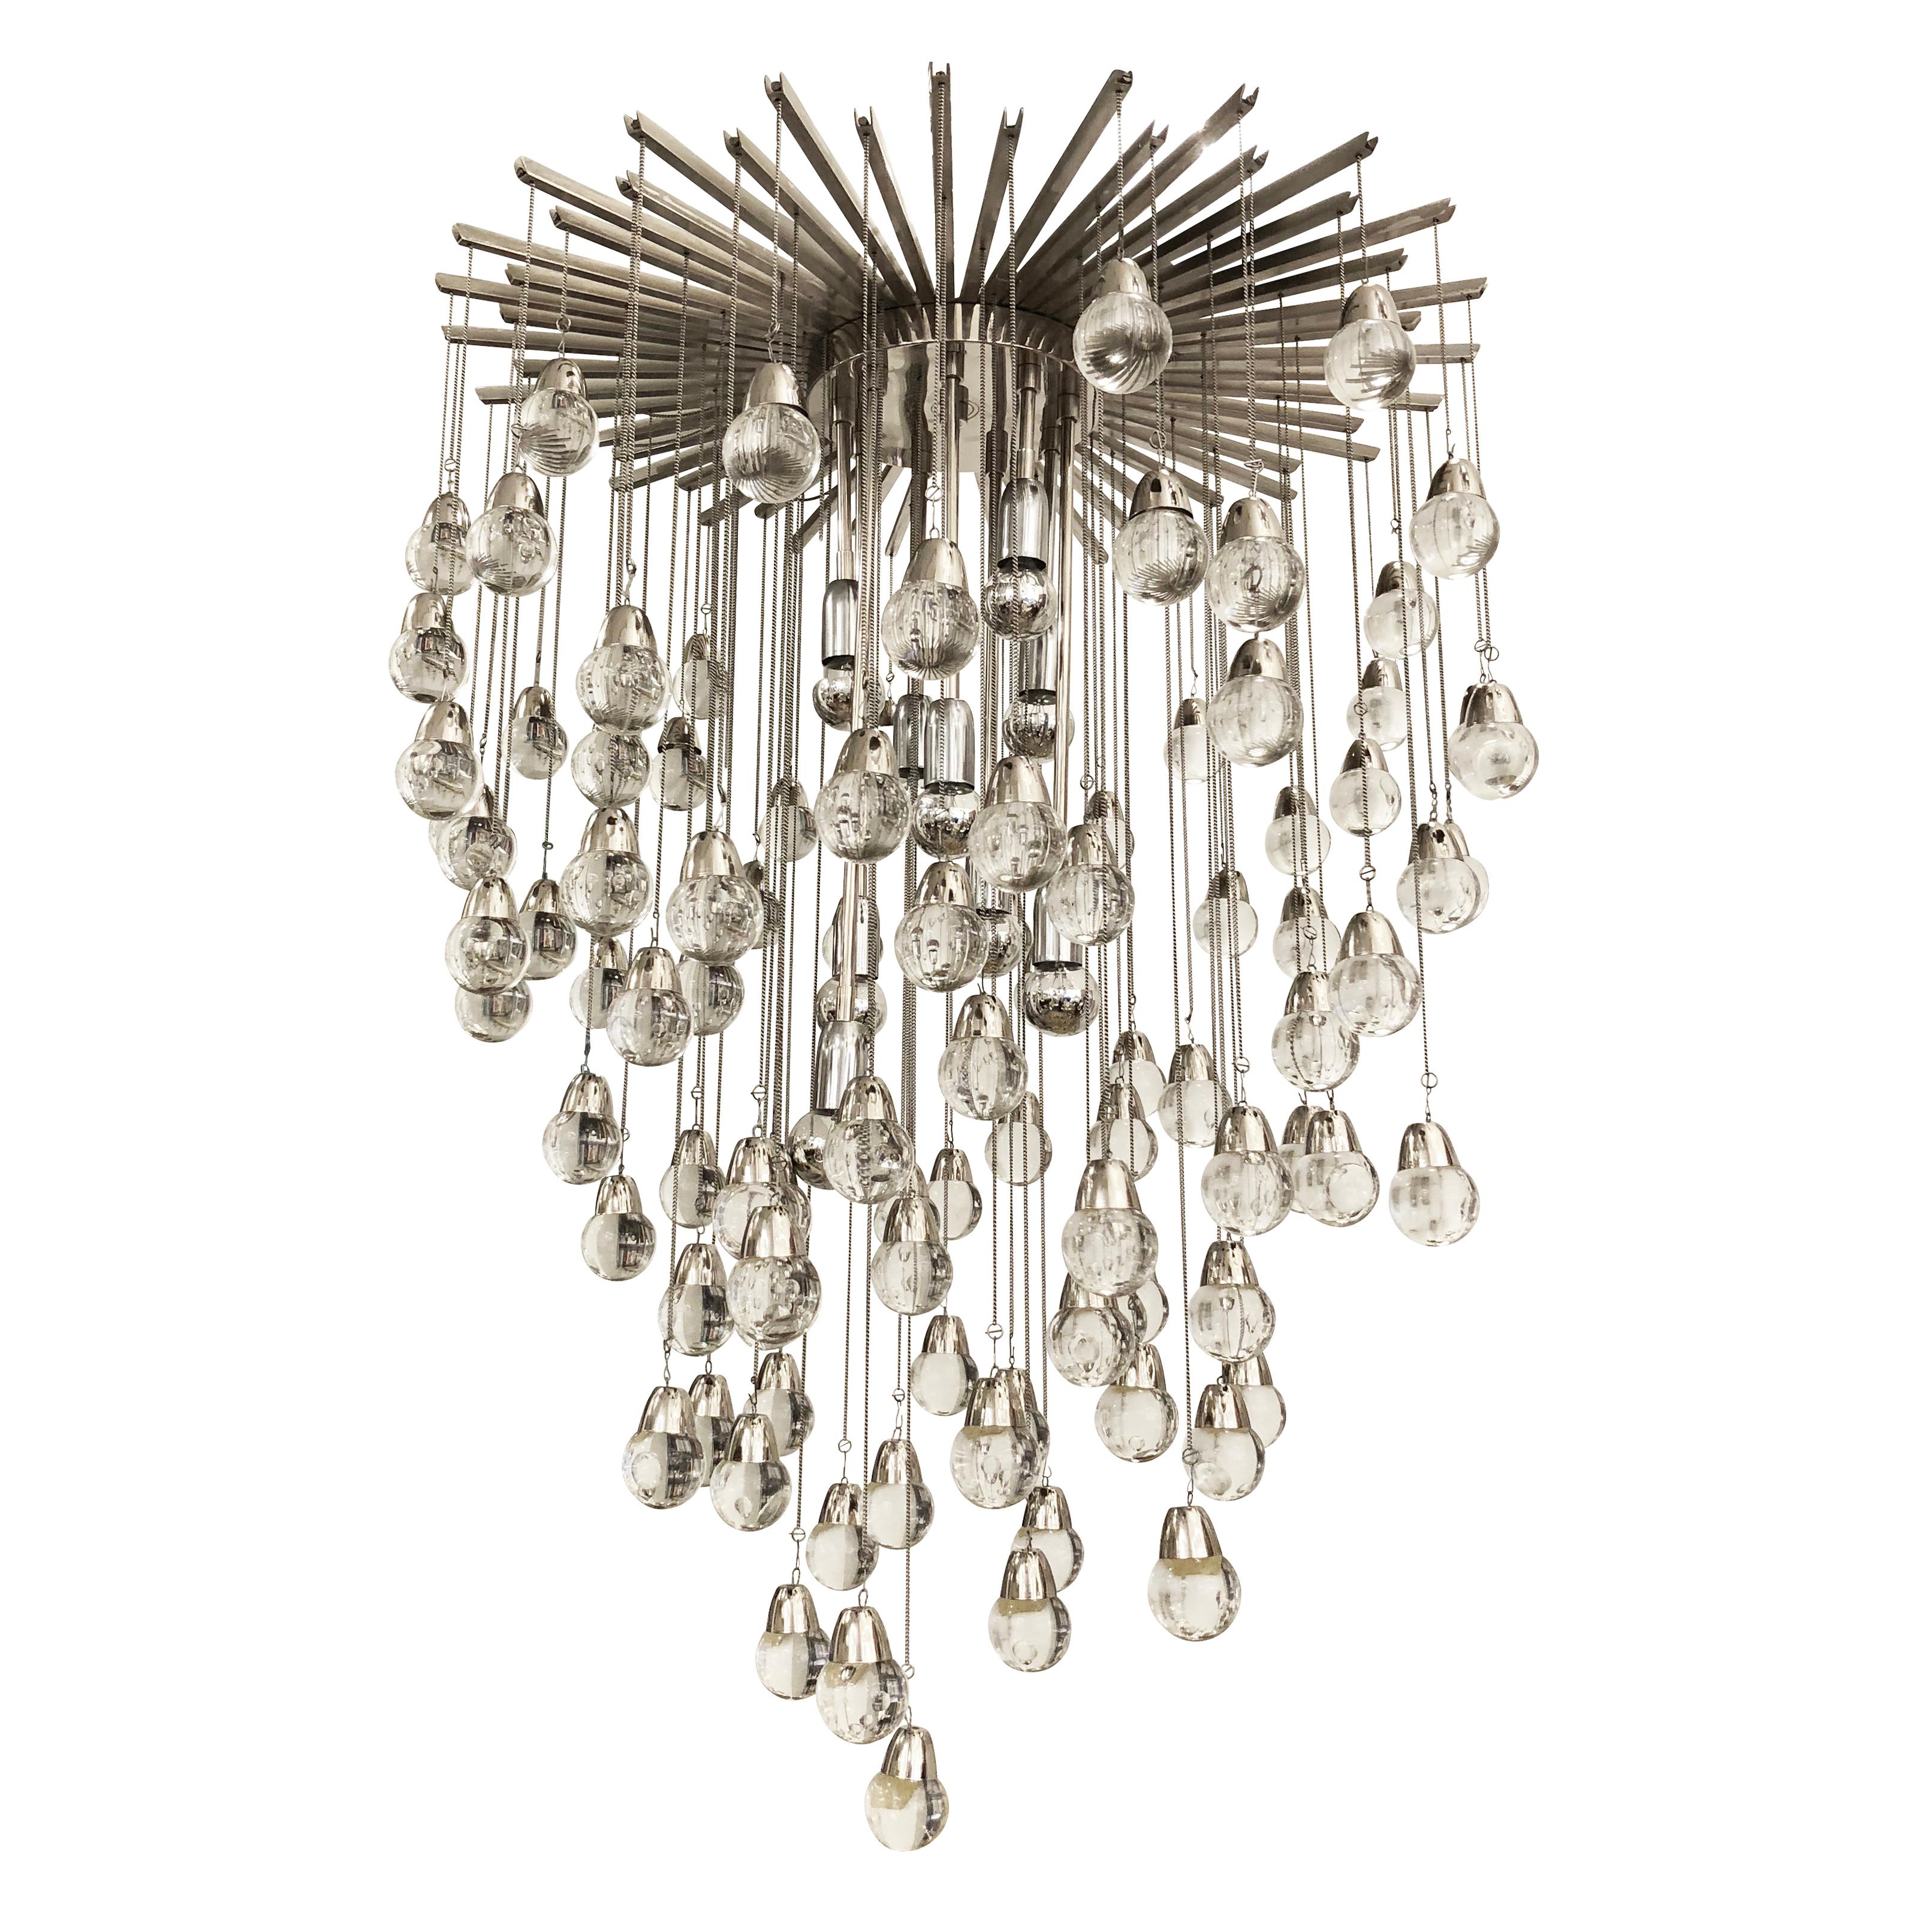 Eye-catching chandelier made with more than ninety glass spheres hanging from a star-shaped canopy. Nine stems with sockets come down from the star structure. Light bulbs are located at the same height of the spheres making them blend in. The height